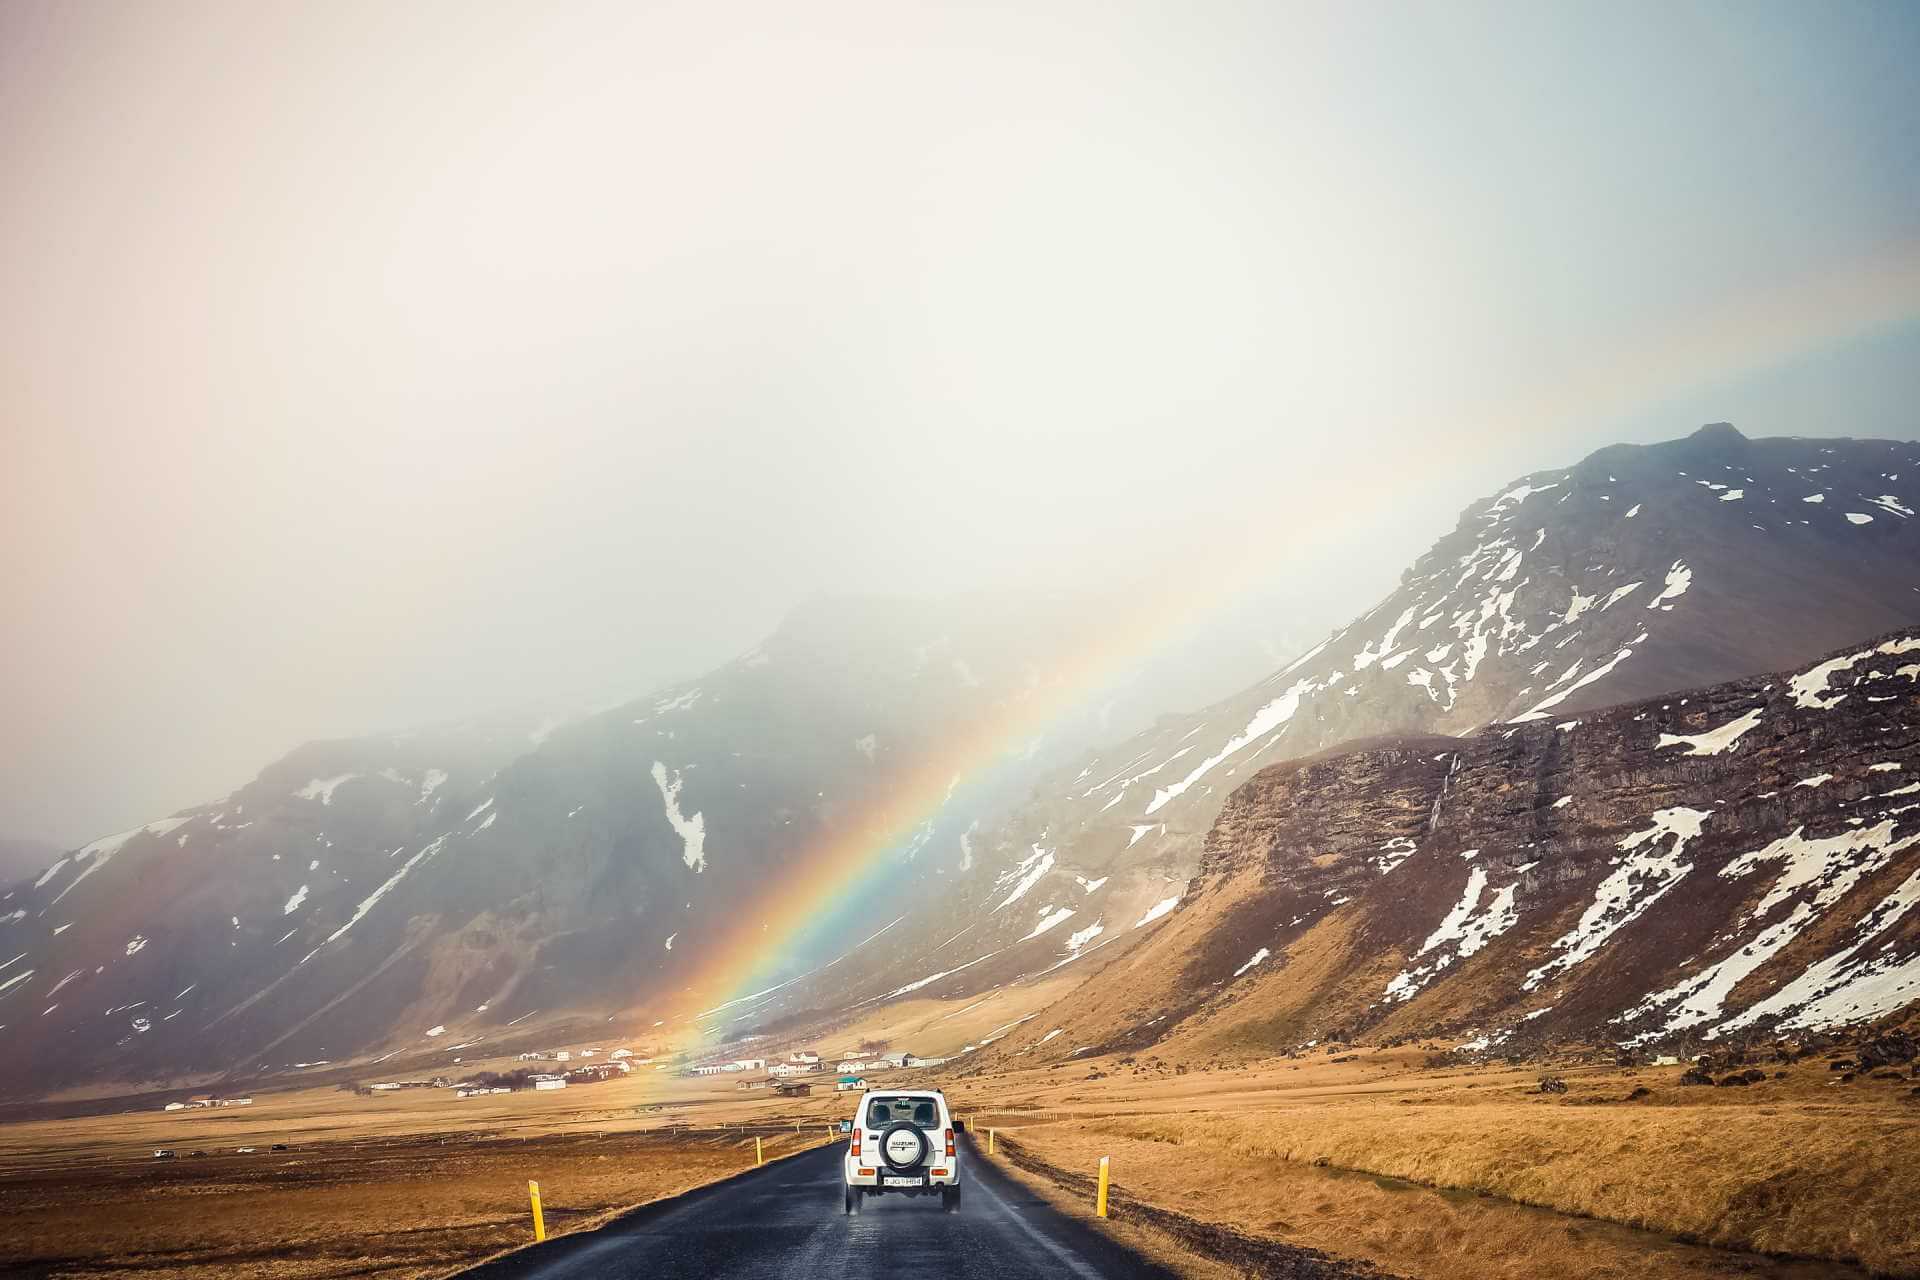 There's a path that works - car driving to rainbow